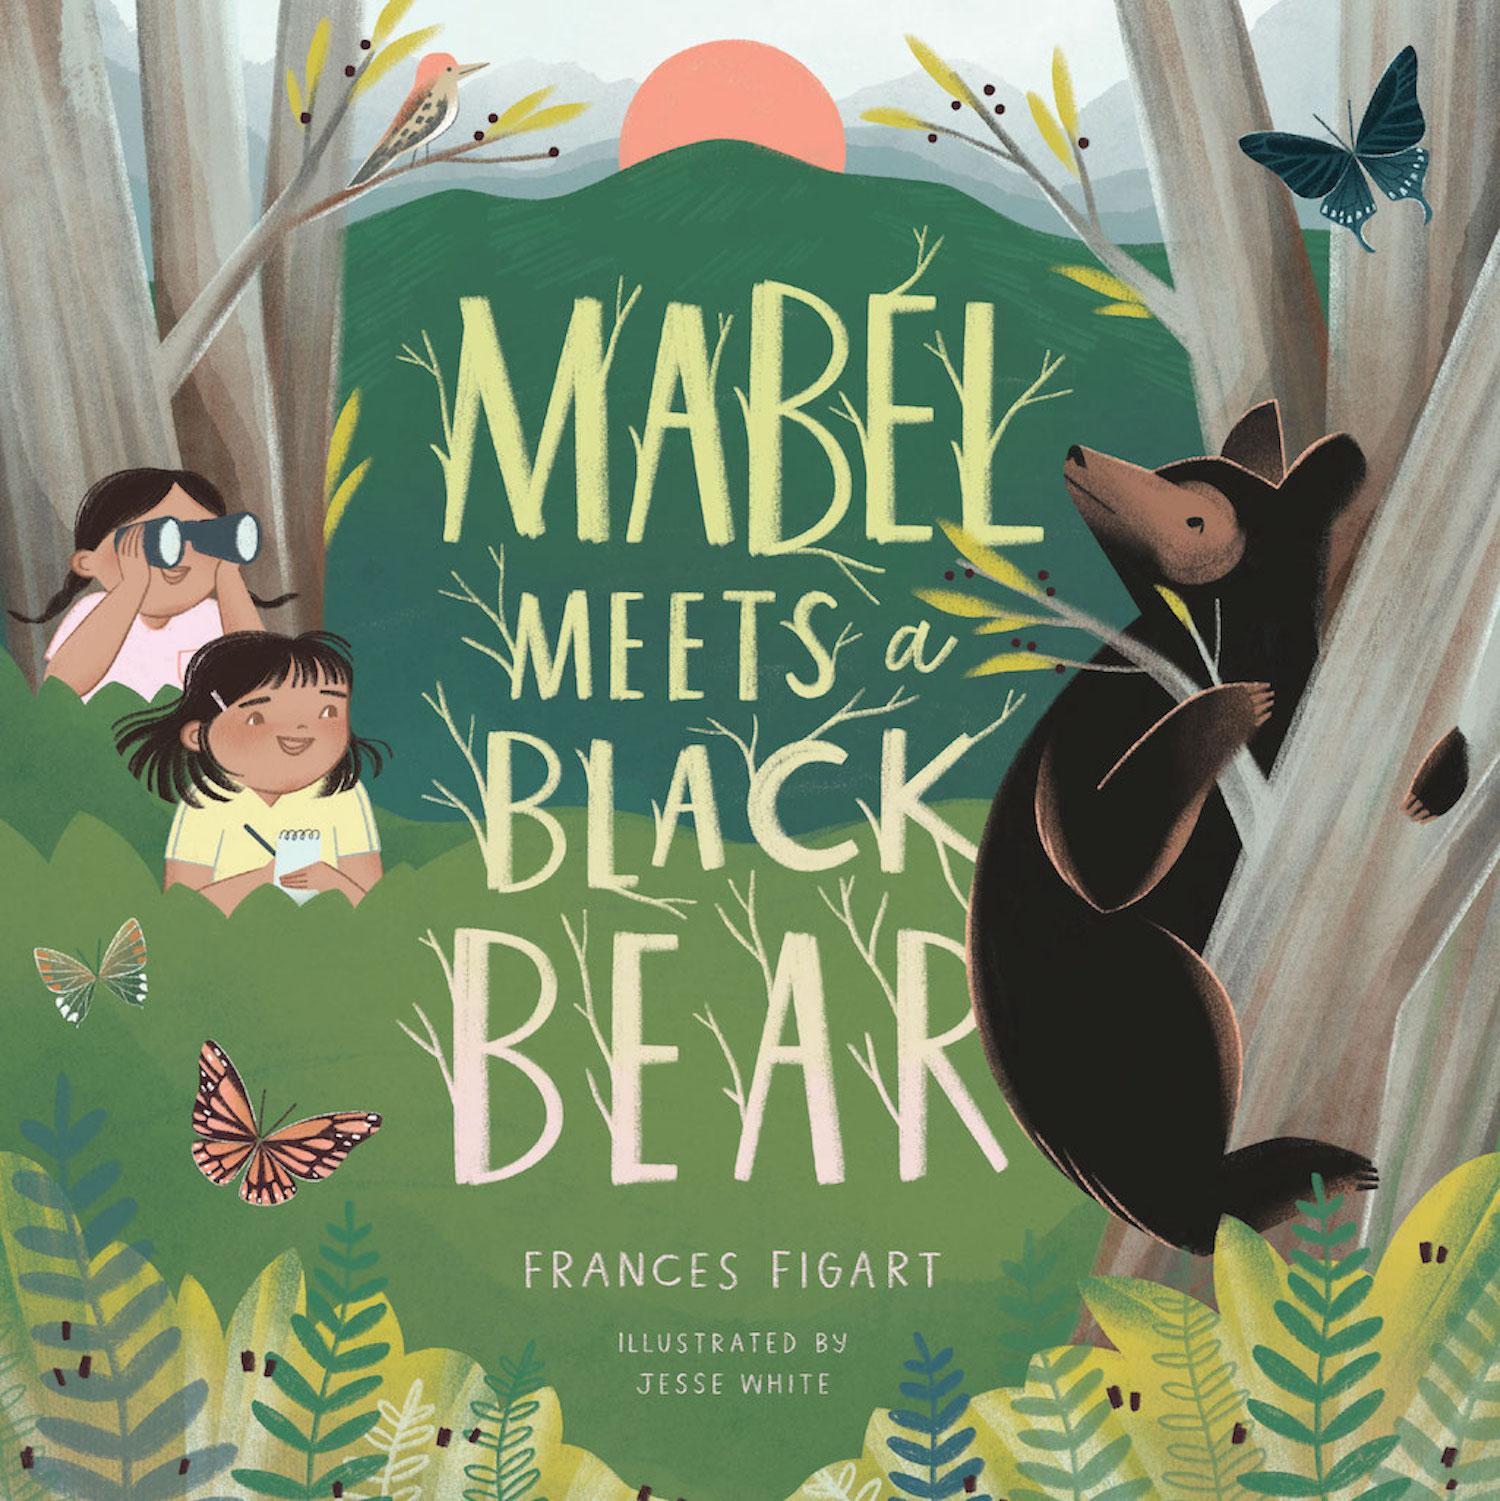 “Mabel Meets a Black Bear” is written by Frances Figart for children ages 5 through 10 to read with their parents and grandparents. Its main characters are twin girls who are vacationing with their mom and dad in a Smokies rental cabin near the park.